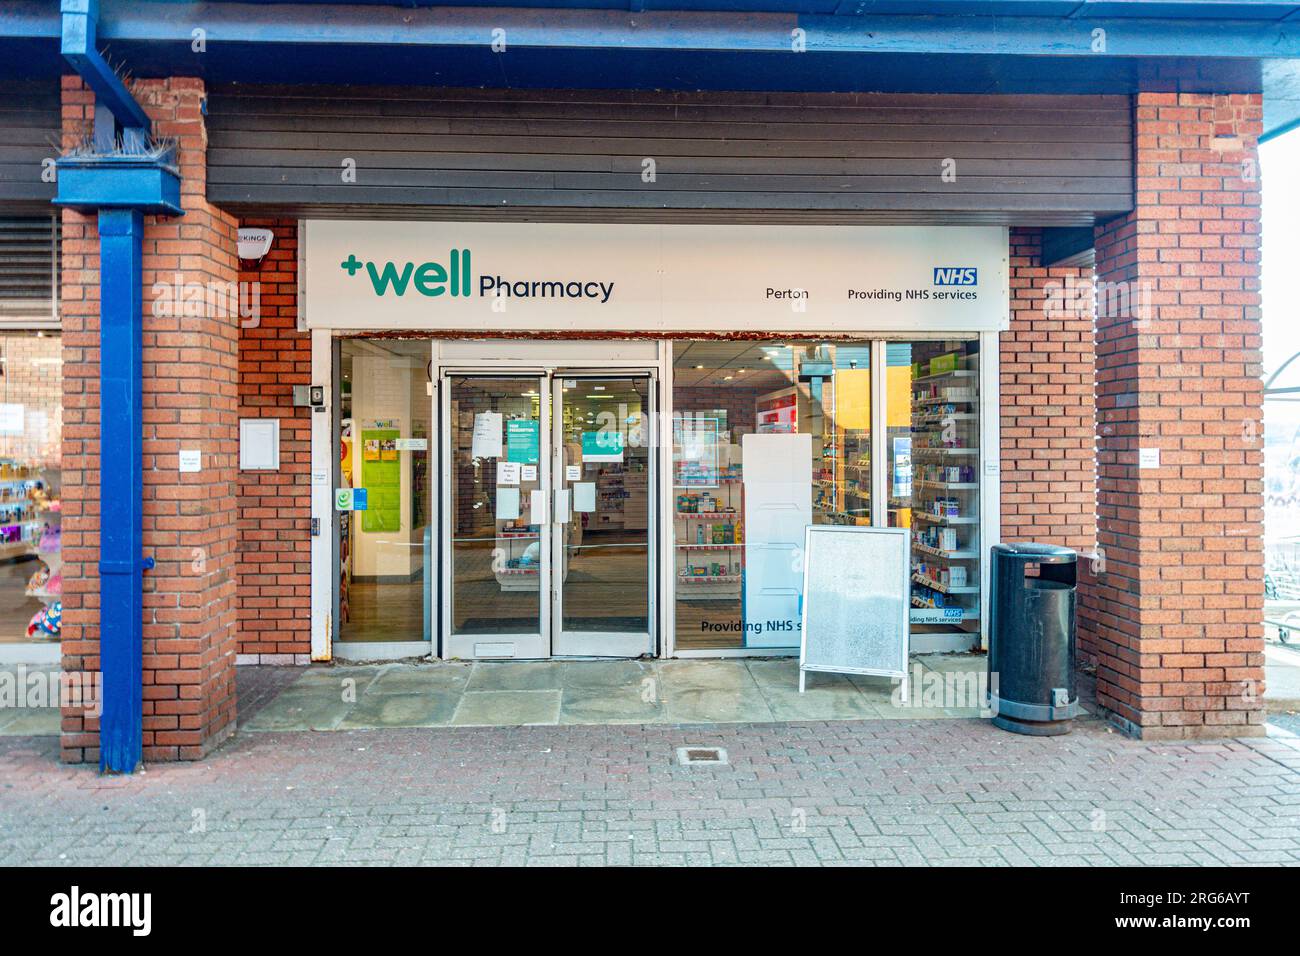 The +well pharmacy store in Perton, South Staffordshire. Stock Photo